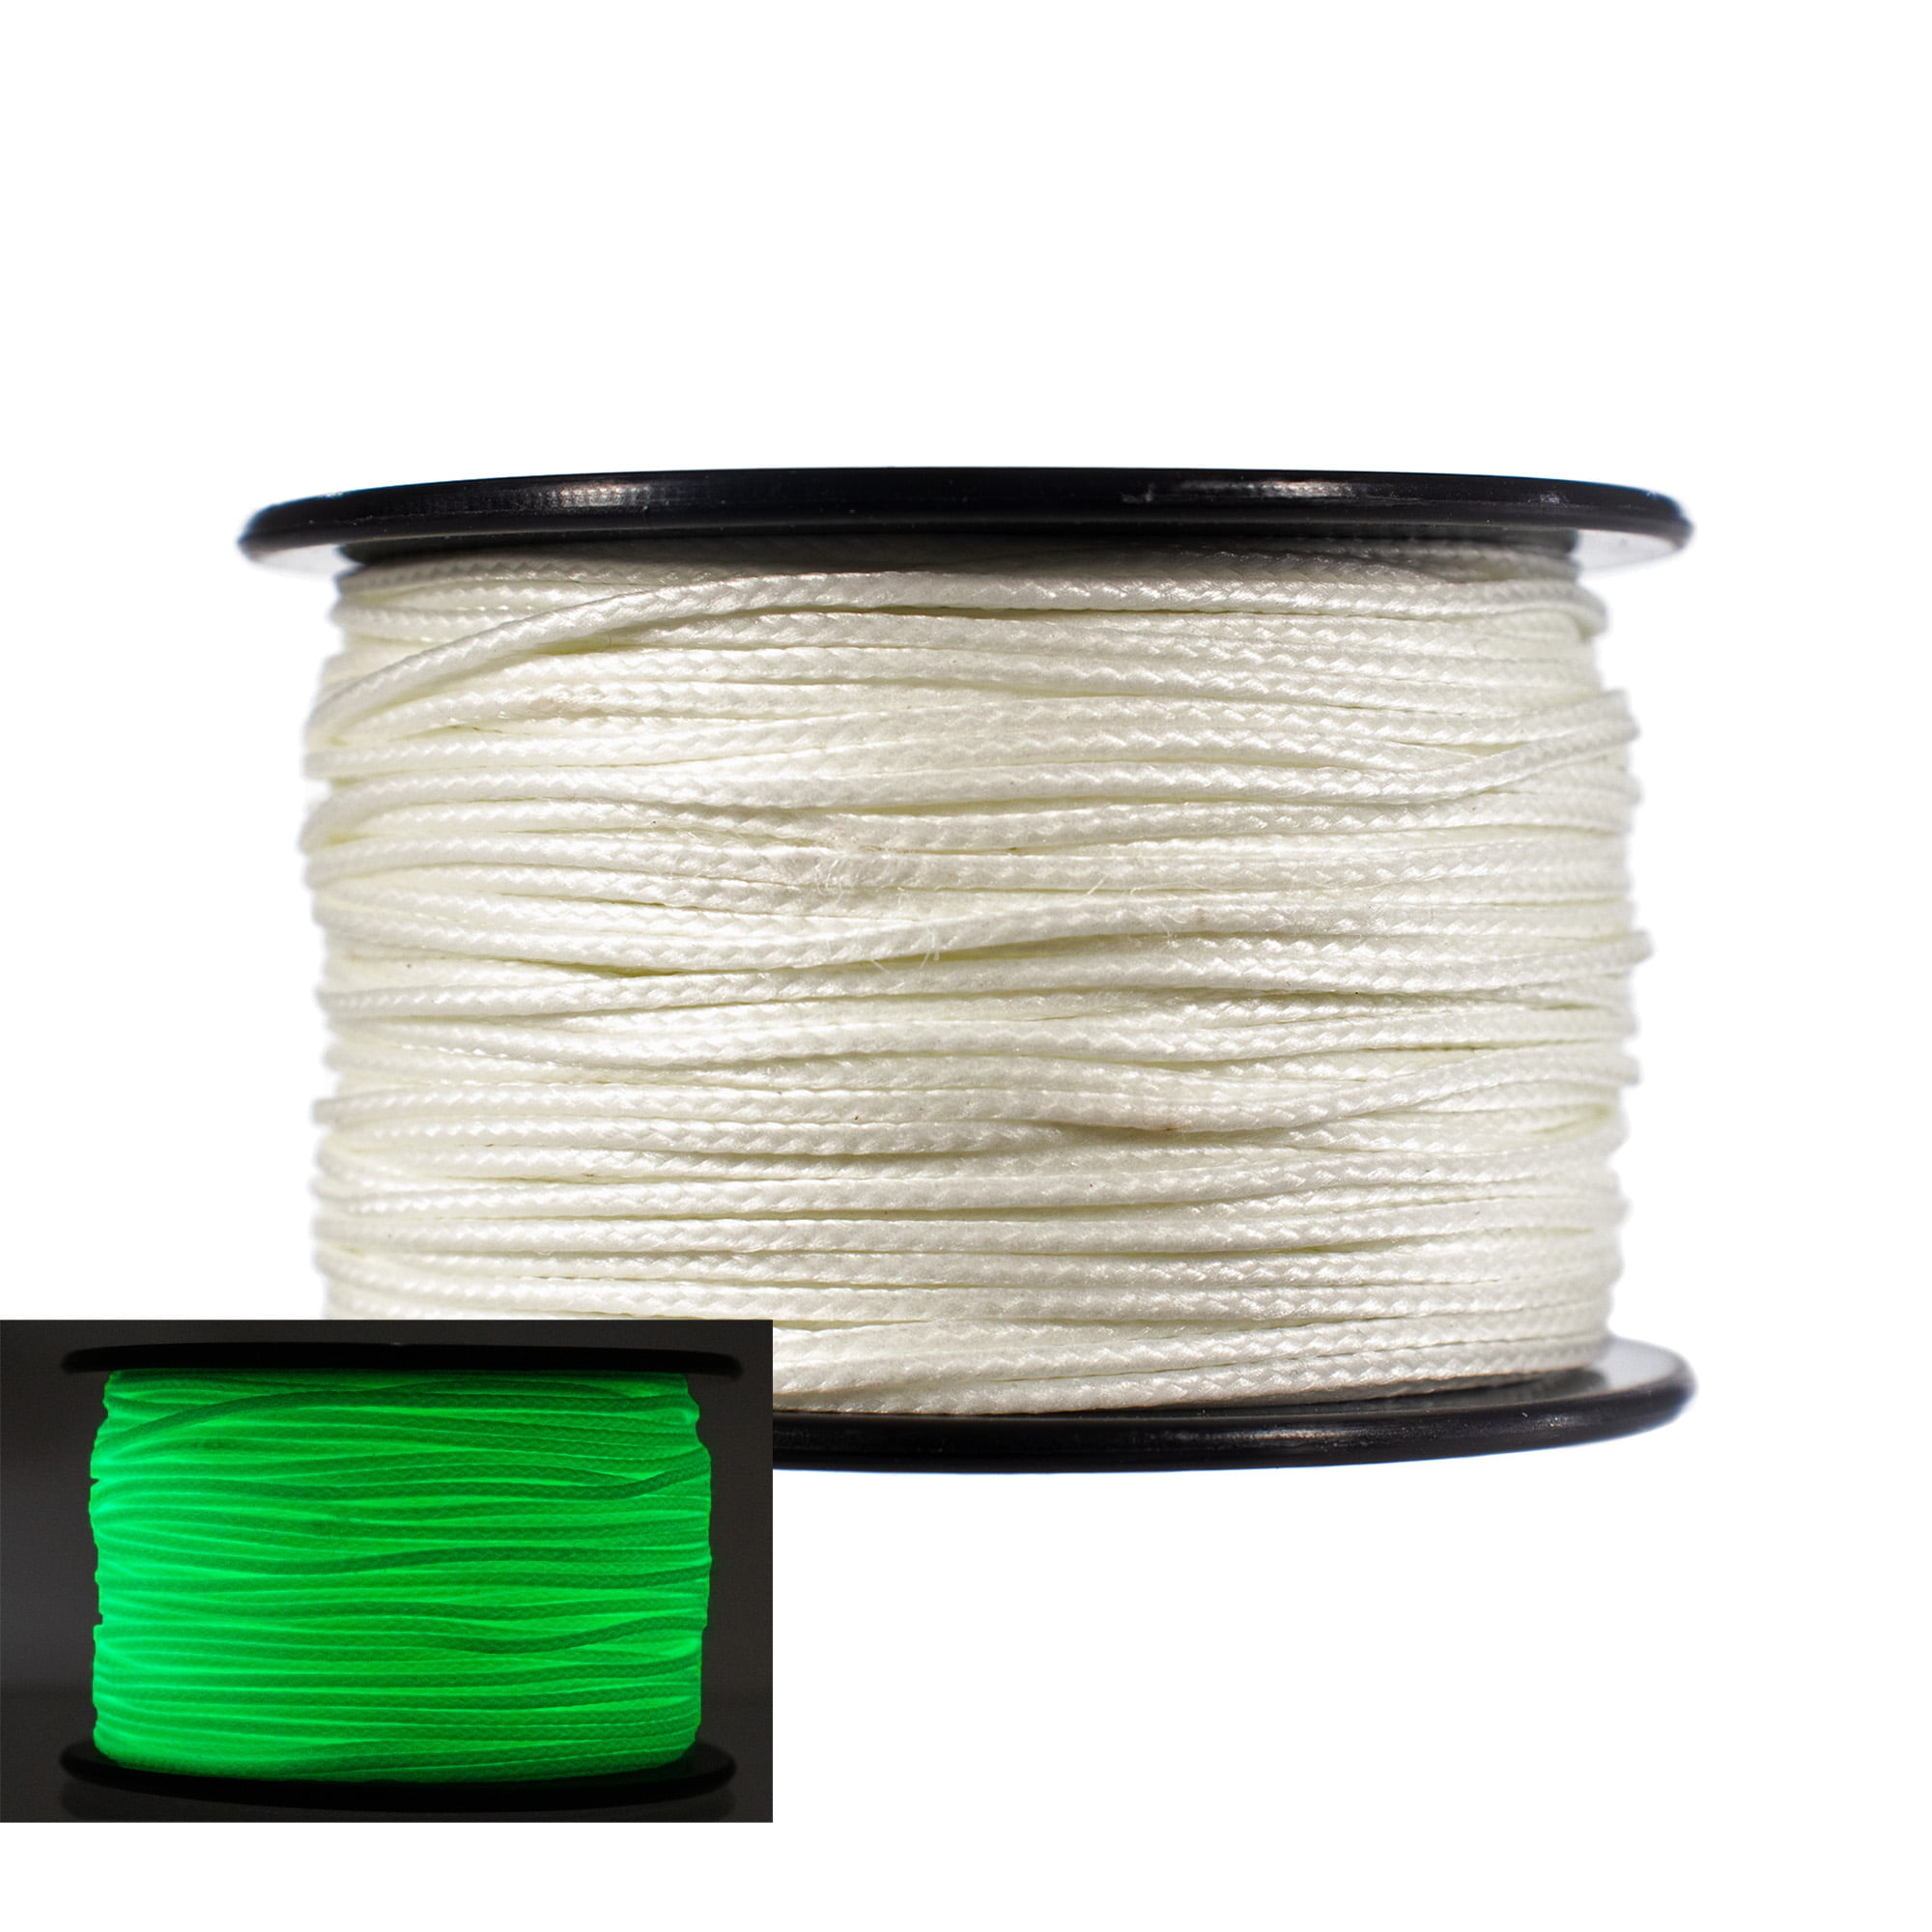  Paracord Planet Micro Cord 1.18mm Diameter 125 Feet Spool of  Braided Cord - Available in a Variety of Colors Made in The USA : Sports &  Outdoors